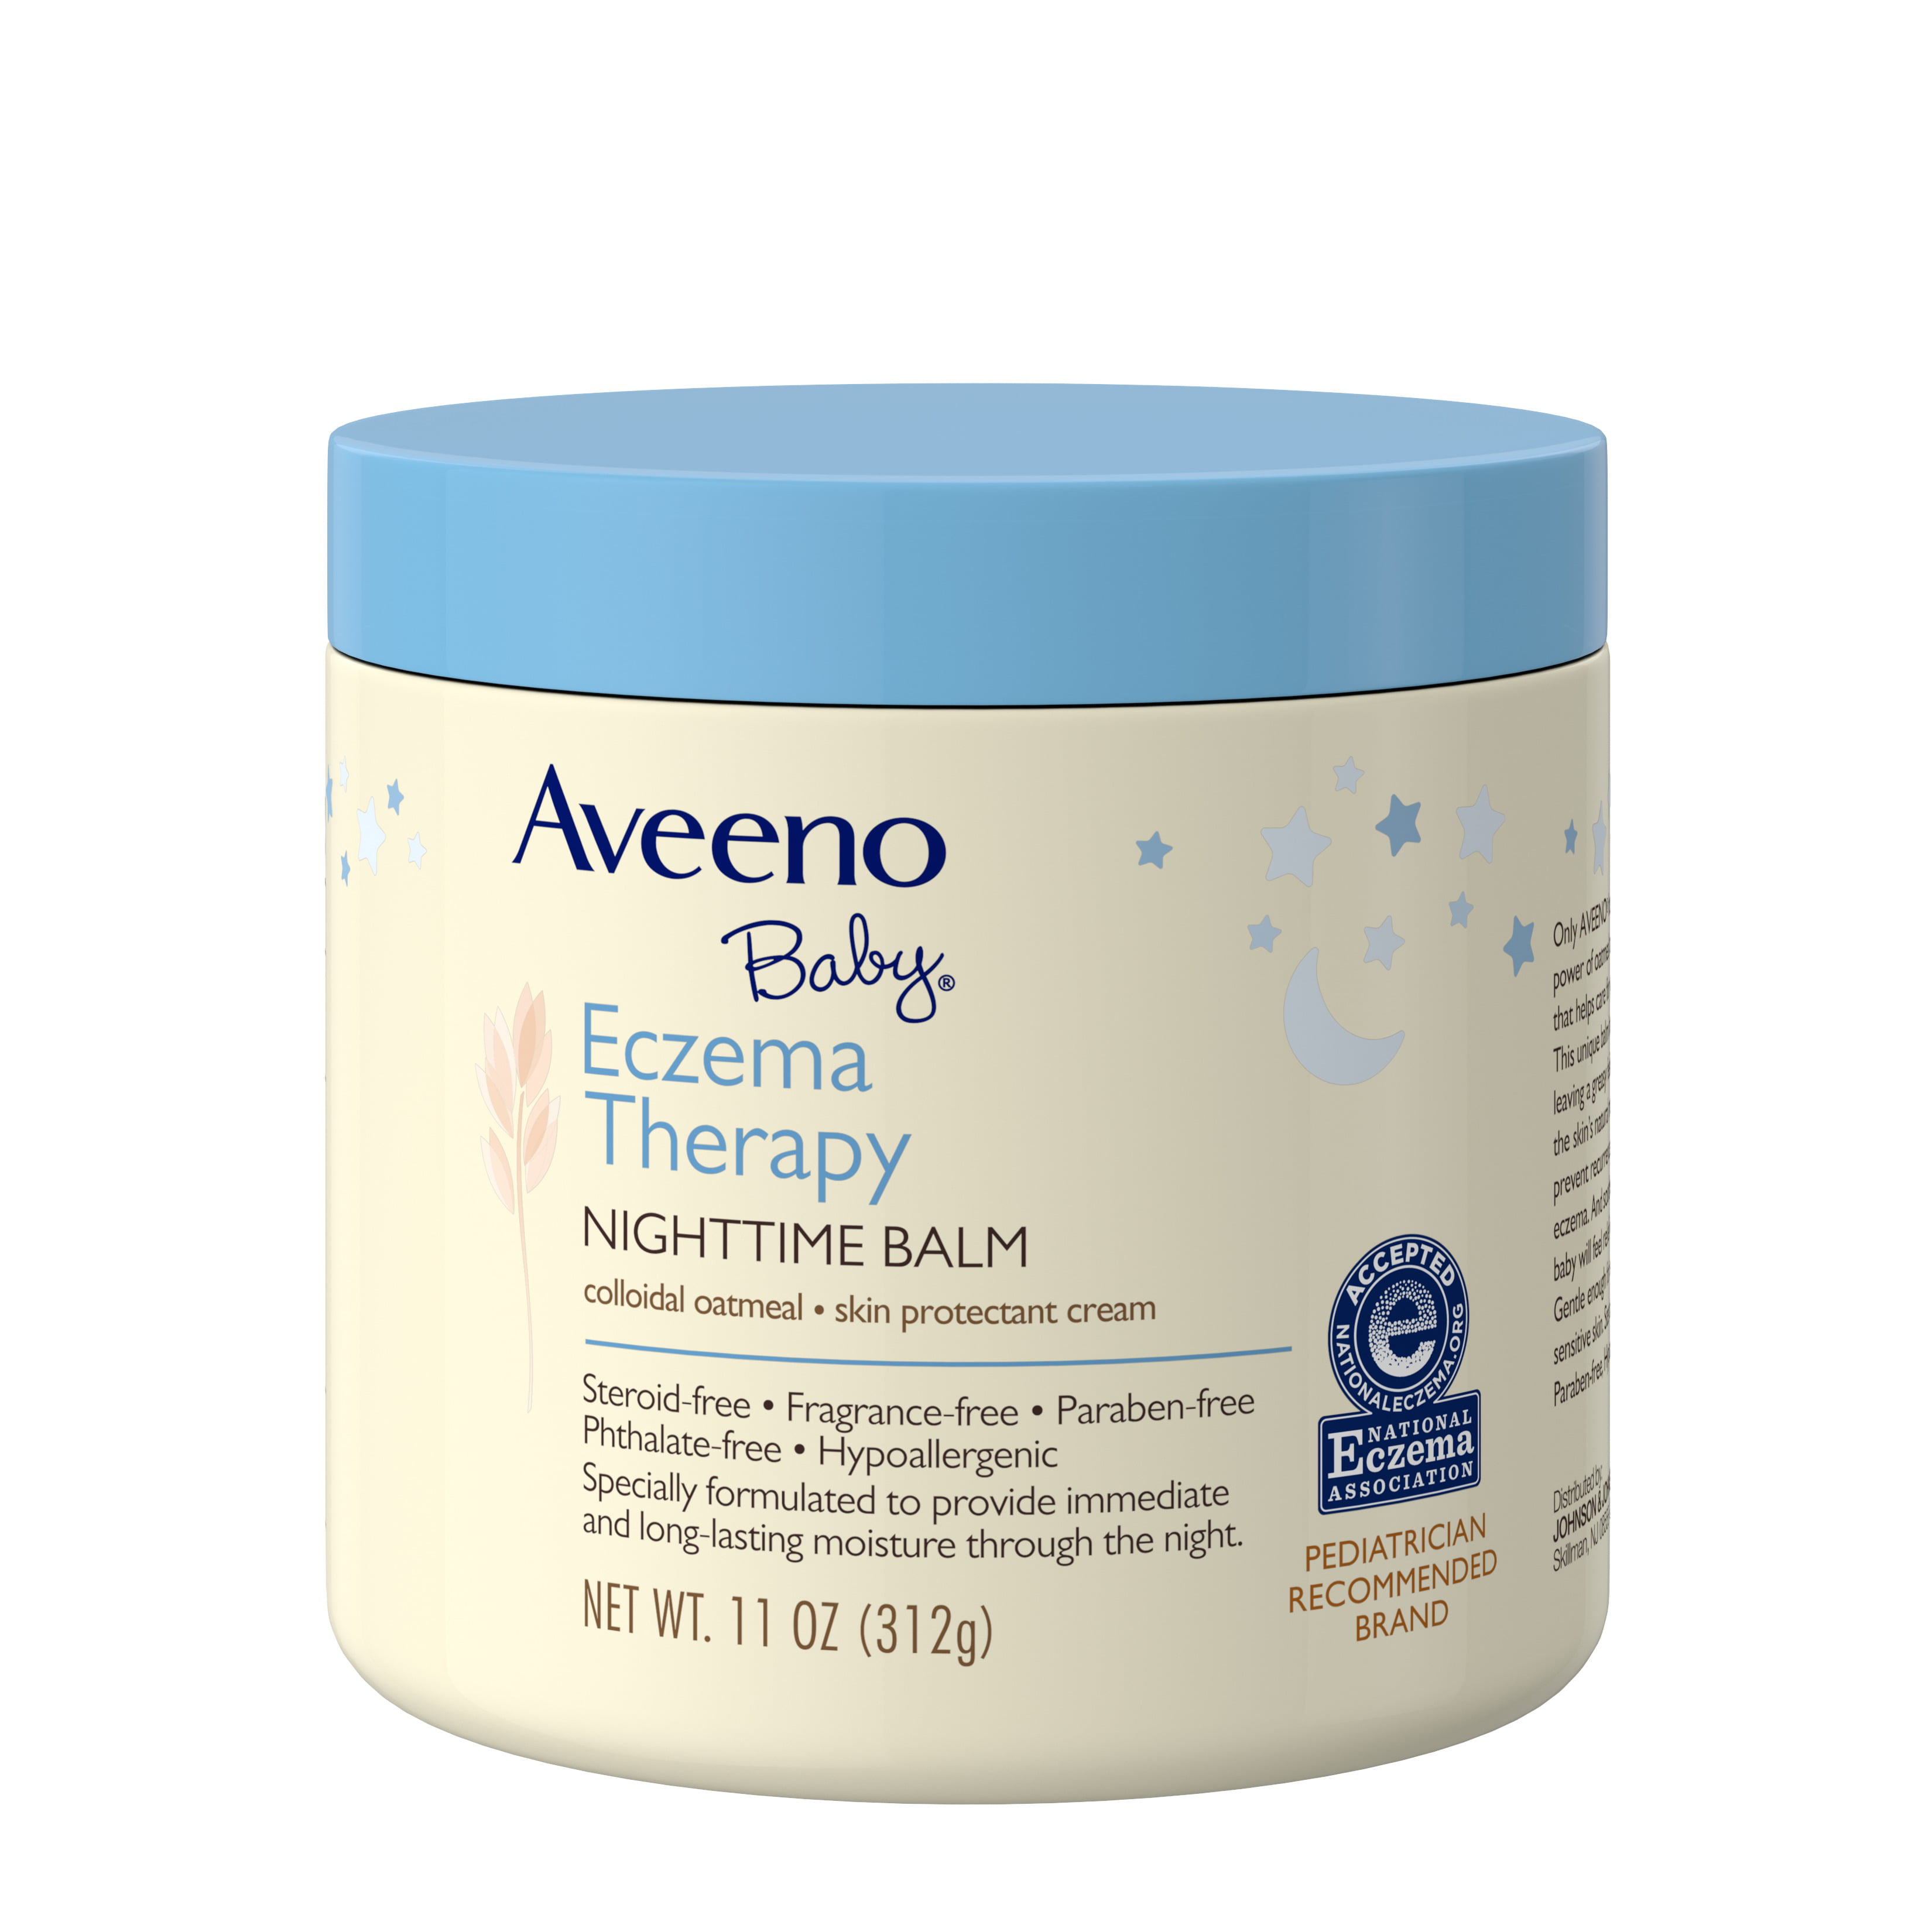 Aveeno Baby Eczema Therapy Nighttime Balm With Natural Oatmeal 11 Oz